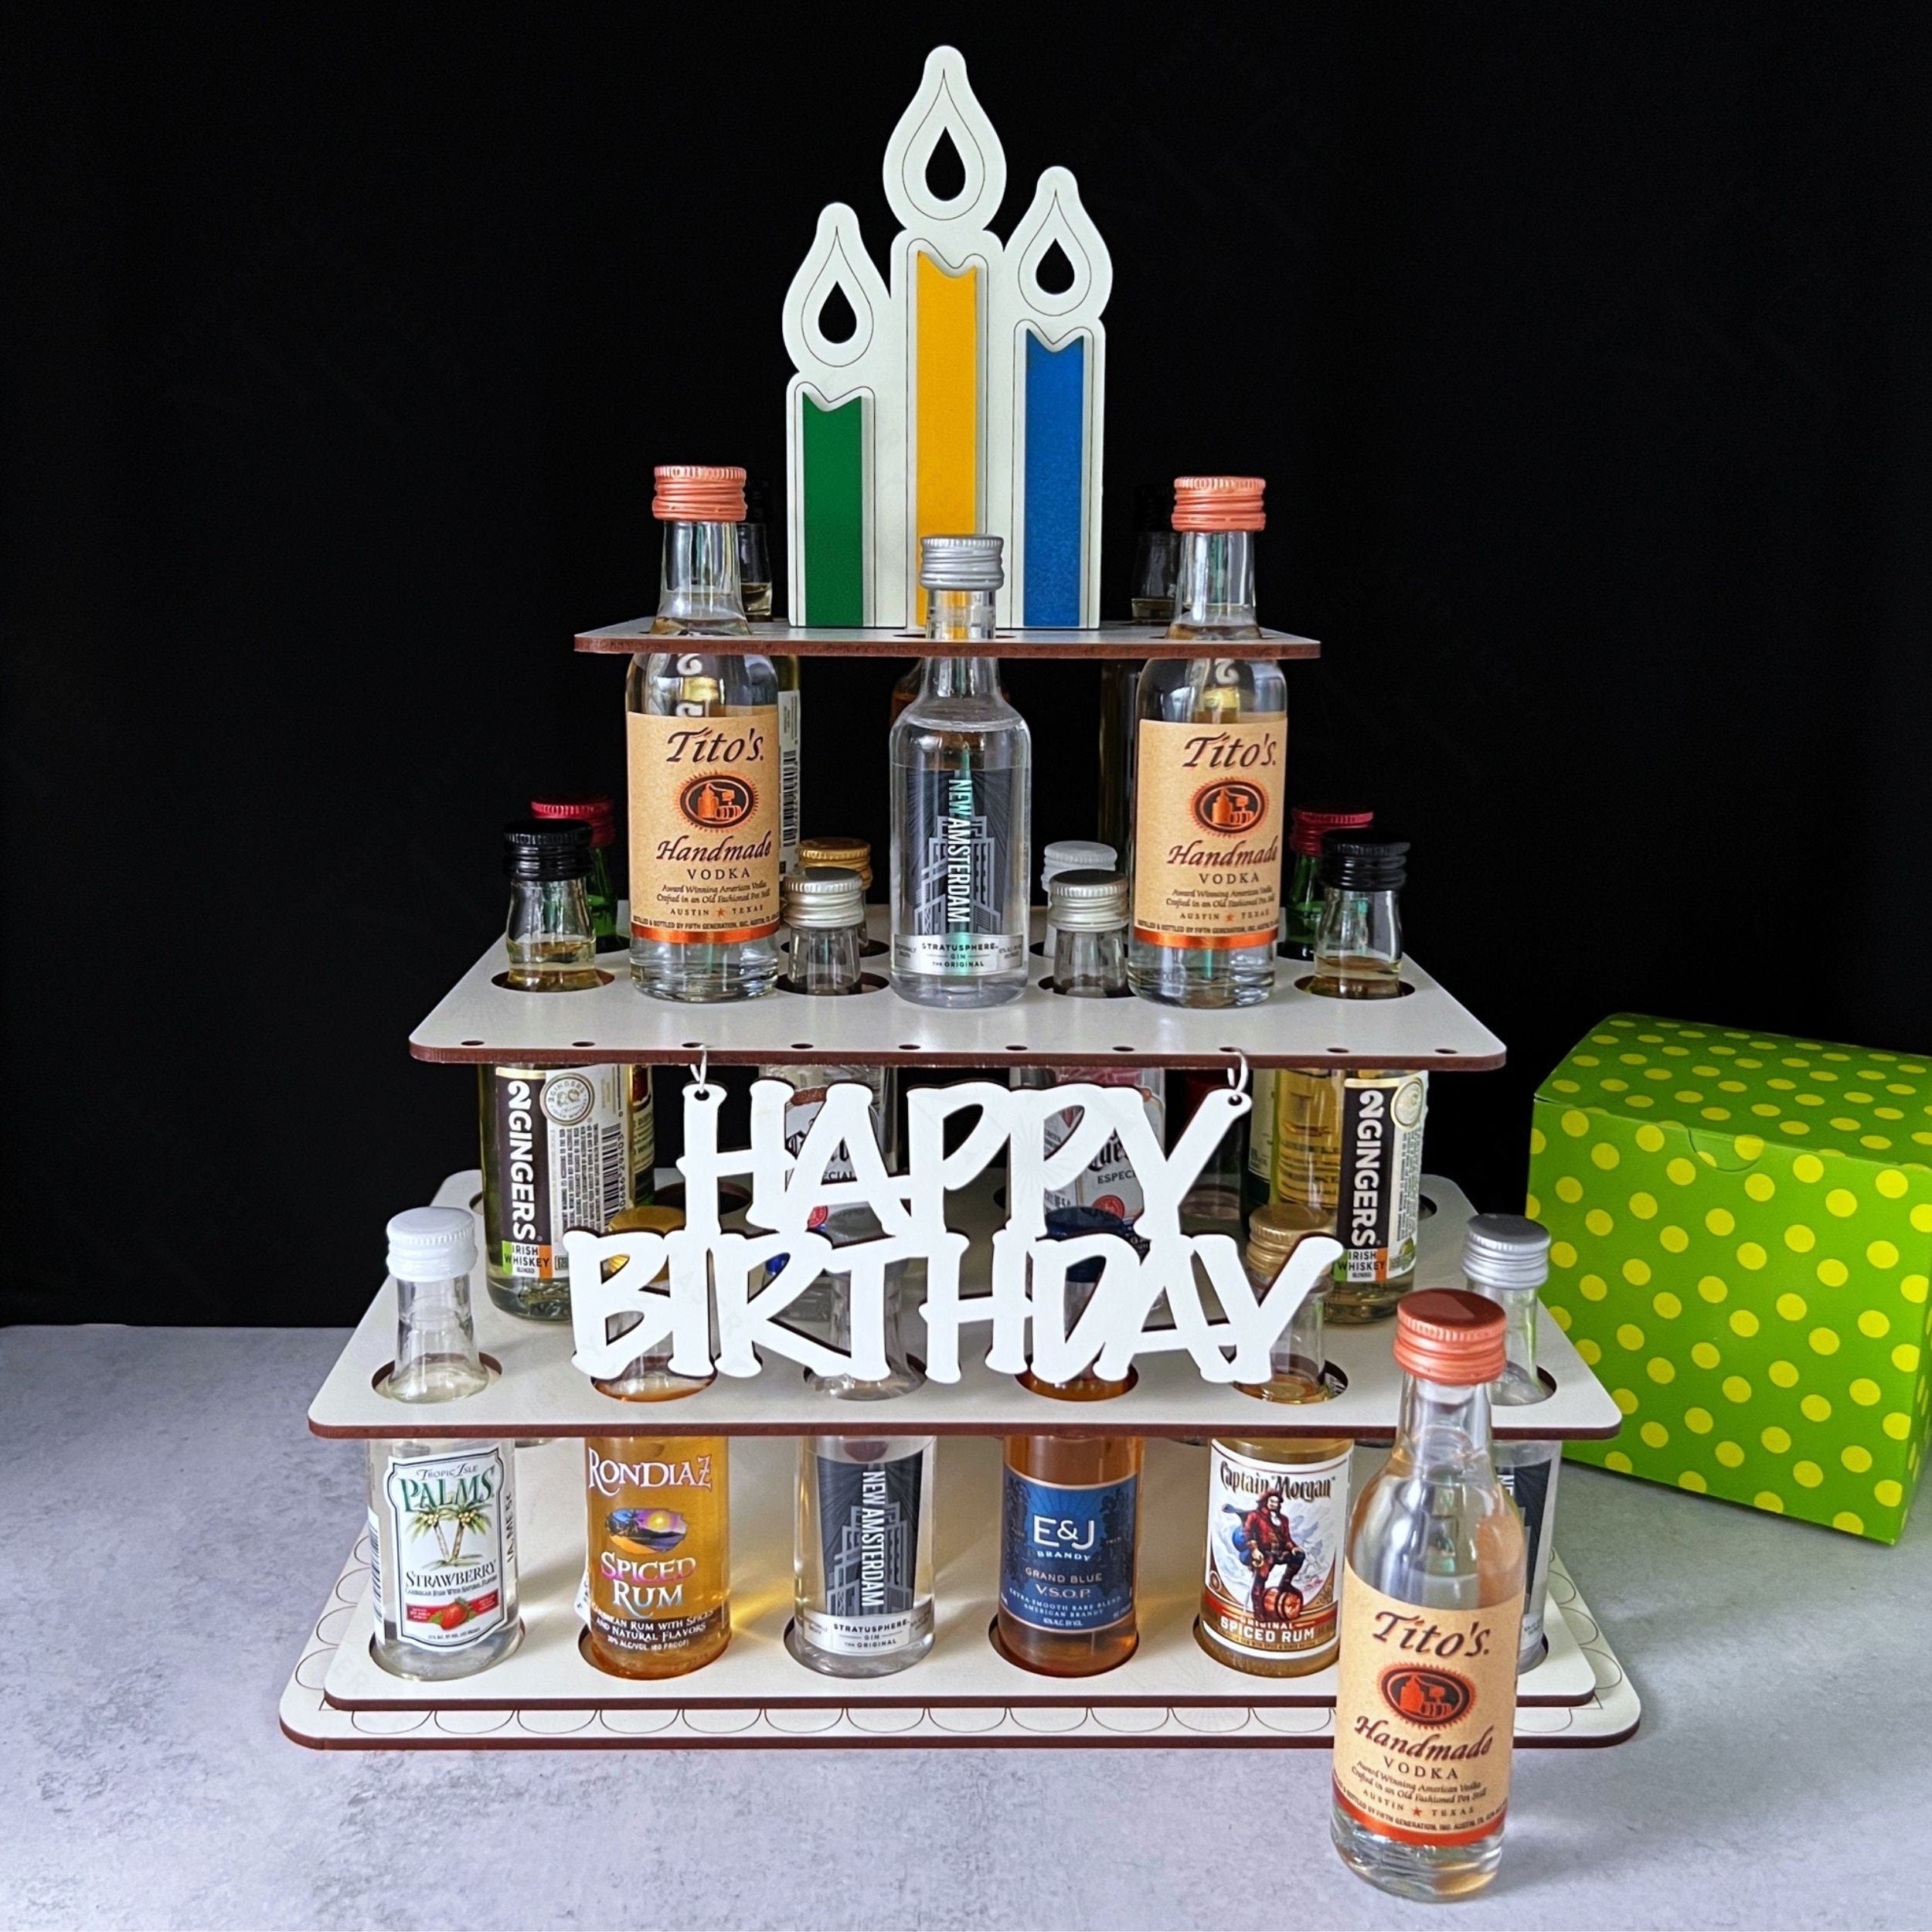 Alcohol Birthday Cake Ideas Images (Pictures) | Alcohol birthday cake,  Baker cake, Cake